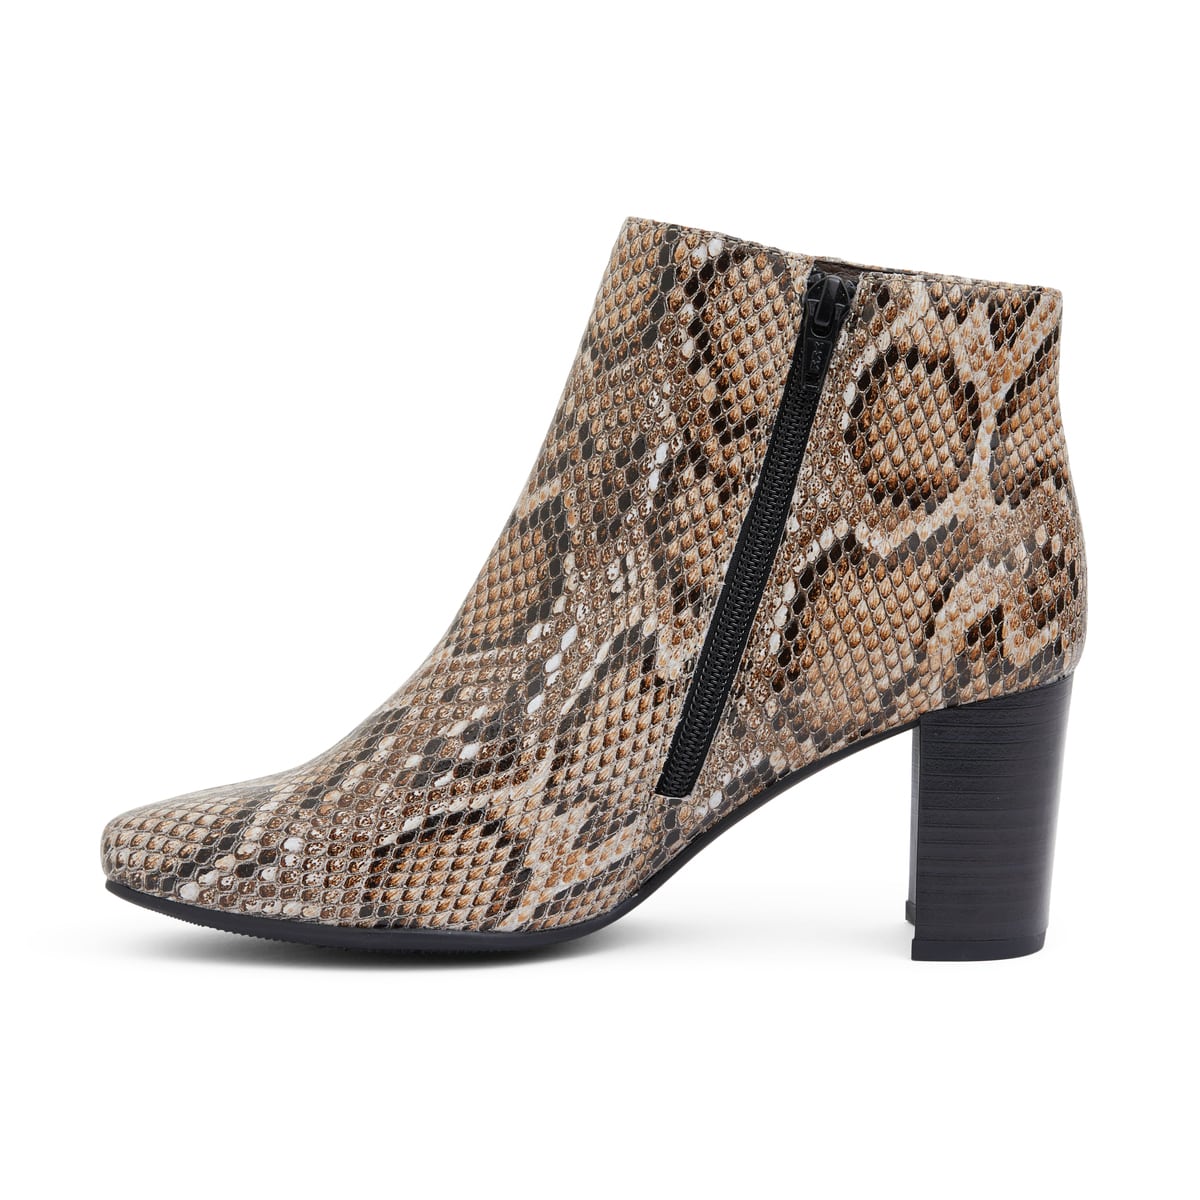 Holland Boot in Neutral Snake Leather